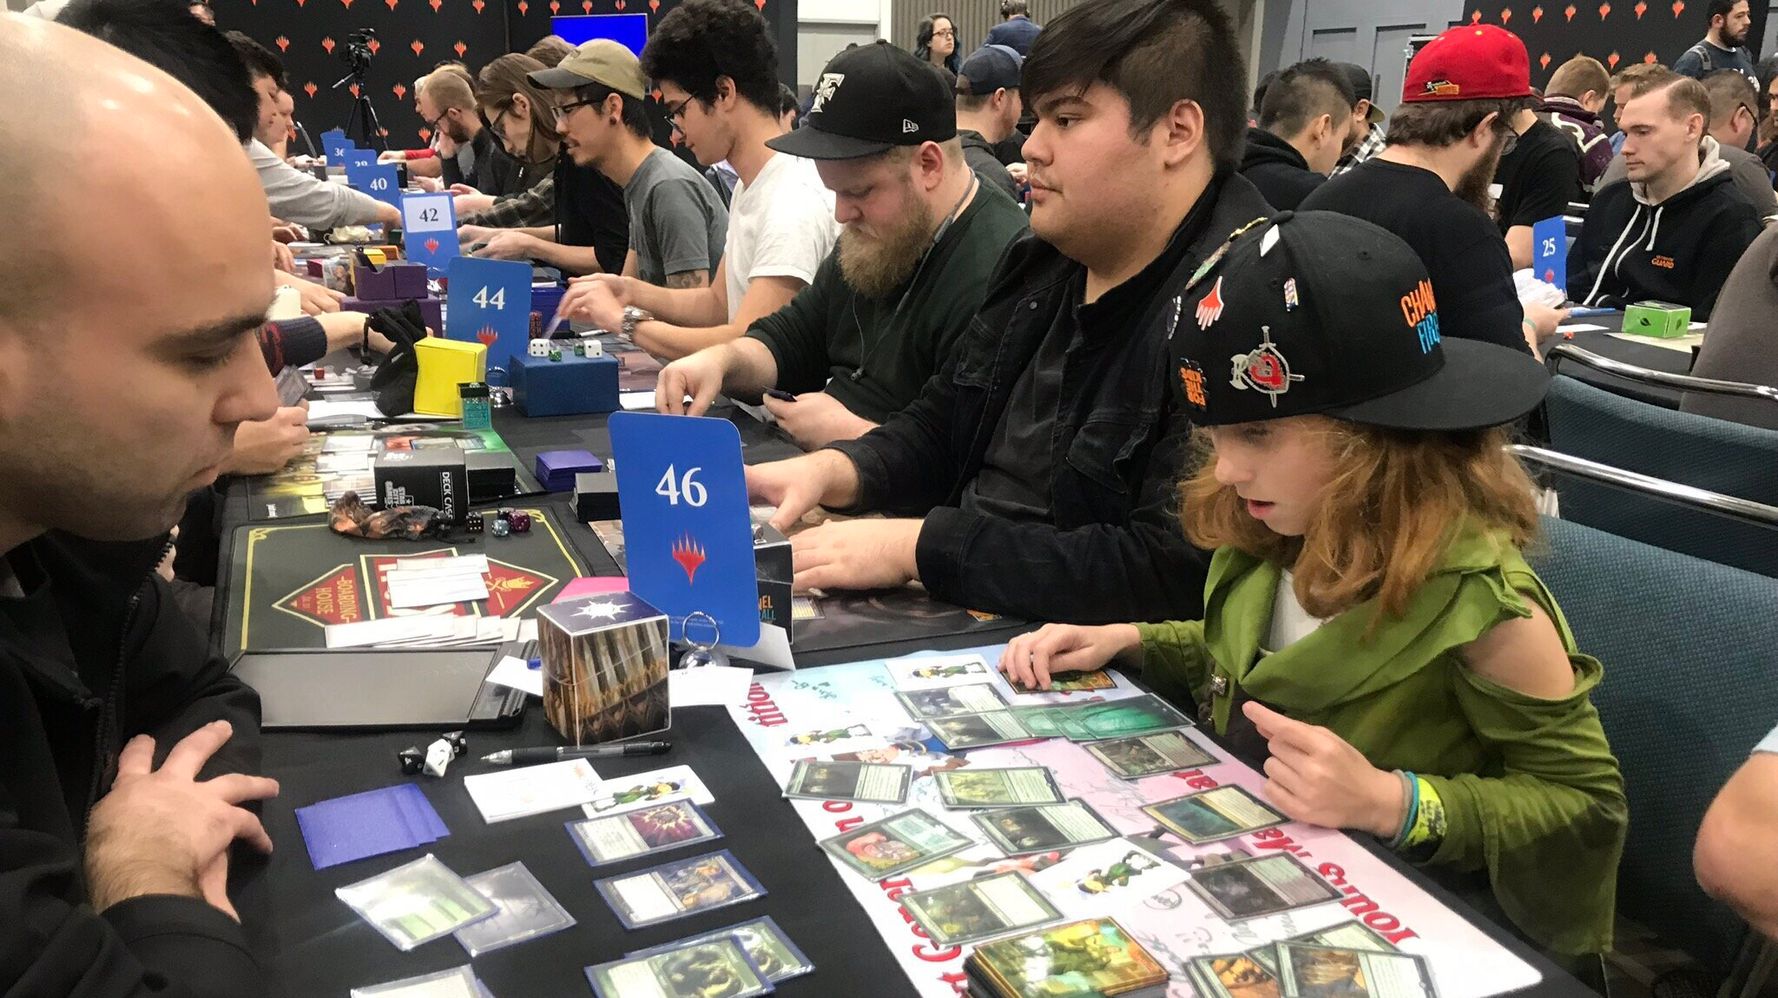 Dana Hamm - 9-Year-Old 'Magic: The Gathering' Player Champions Age And Gender Diversity  | HuffPost Entertainment